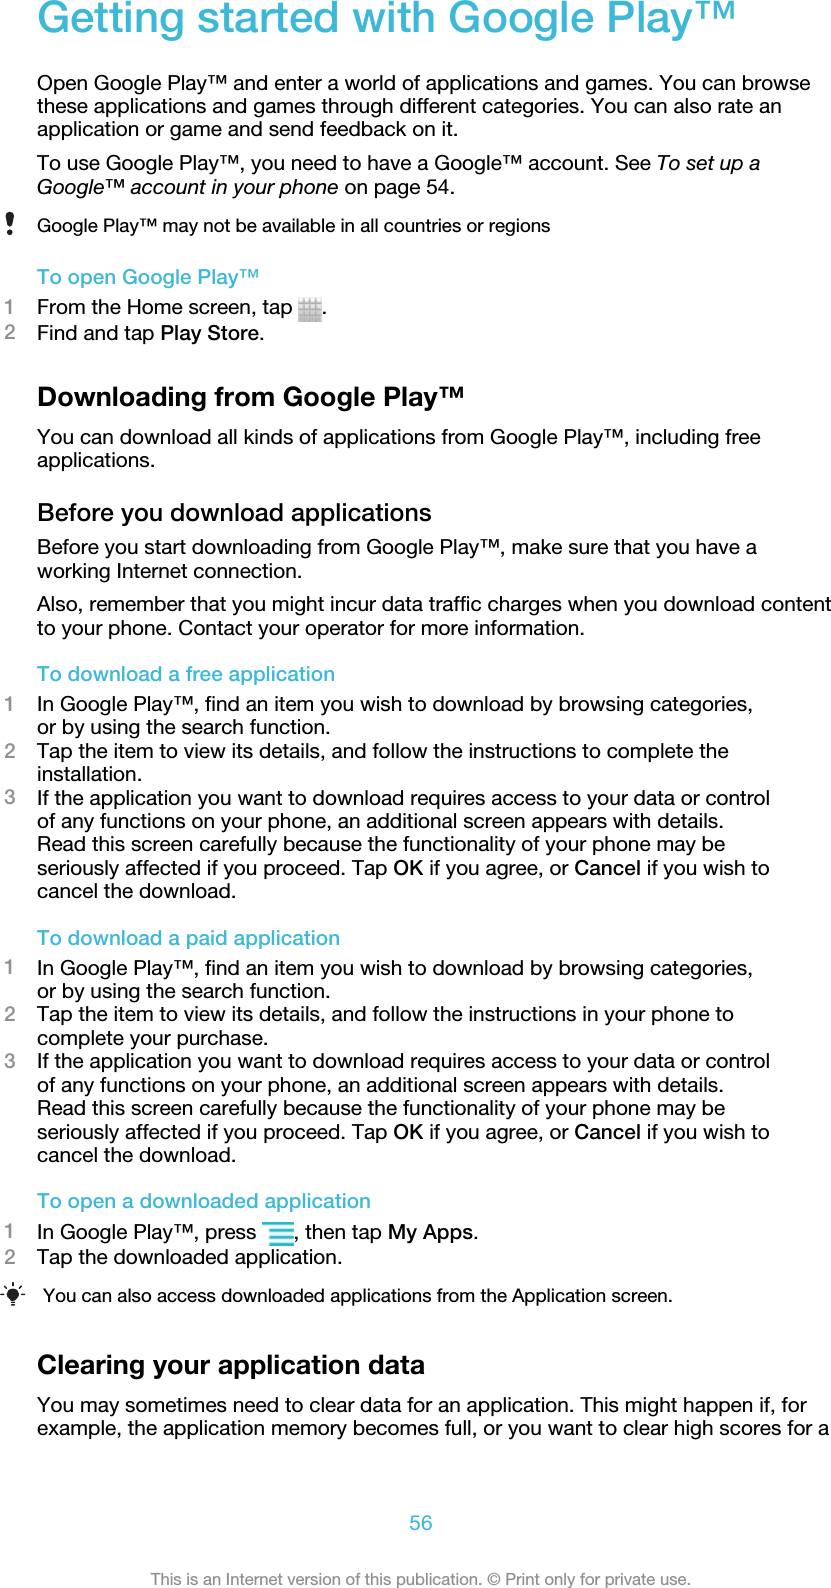 Getting started with Google Play™Open Google Play™ and enter a world of applications and games. You can browsethese applications and games through different categories. You can also rate anapplication or game and send feedback on it.To use Google Play™, you need to have a Google™ account. See To set up aGoogle™ account in your phone on page 54.Google Play™ may not be available in all countries or regionsTo open Google Play™1From the Home screen, tap  .2Find and tap Play Store.Downloading from Google Play™You can download all kinds of applications from Google Play™, including freeapplications.Before you download applicationsBefore you start downloading from Google Play™, make sure that you have aworking Internet connection.Also, remember that you might incur data traffic charges when you download contentto your phone. Contact your operator for more information.To download a free application1In Google Play™, find an item you wish to download by browsing categories,or by using the search function.2Tap the item to view its details, and follow the instructions to complete theinstallation.3If the application you want to download requires access to your data or controlof any functions on your phone, an additional screen appears with details.Read this screen carefully because the functionality of your phone may beseriously affected if you proceed. Tap OK if you agree, or Cancel if you wish tocancel the download.To download a paid application1In Google Play™, find an item you wish to download by browsing categories,or by using the search function.2Tap the item to view its details, and follow the instructions in your phone tocomplete your purchase.3If the application you want to download requires access to your data or controlof any functions on your phone, an additional screen appears with details.Read this screen carefully because the functionality of your phone may beseriously affected if you proceed. Tap OK if you agree, or Cancel if you wish tocancel the download.To open a downloaded application1In Google Play™, press  , then tap My Apps.2Tap the downloaded application.You can also access downloaded applications from the Application screen.Clearing your application dataYou may sometimes need to clear data for an application. This might happen if, forexample, the application memory becomes full, or you want to clear high scores for a56This is an Internet version of this publication. © Print only for private use.